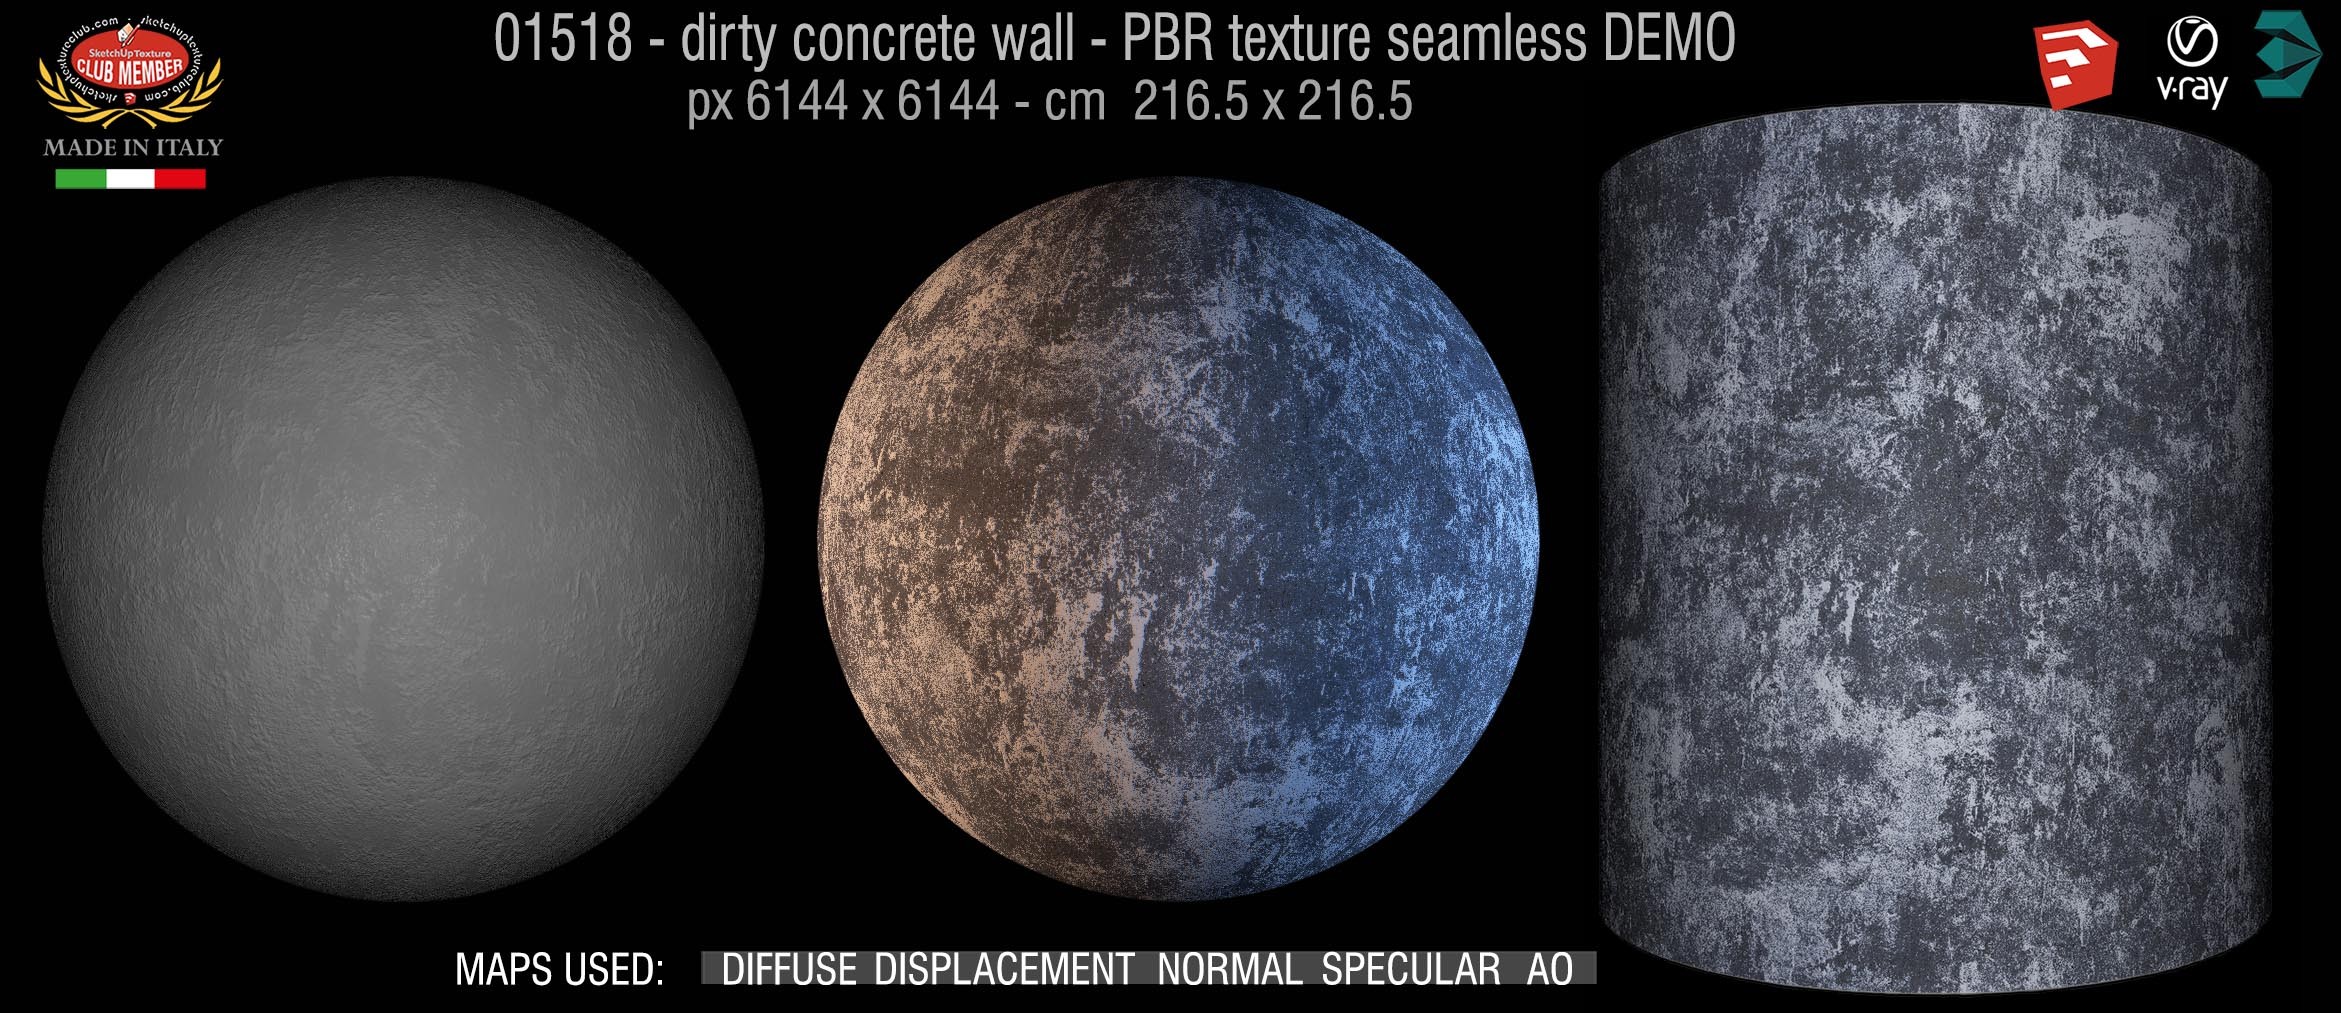 01518 Concrete bare dirty wall PBR texture seamless DEMO